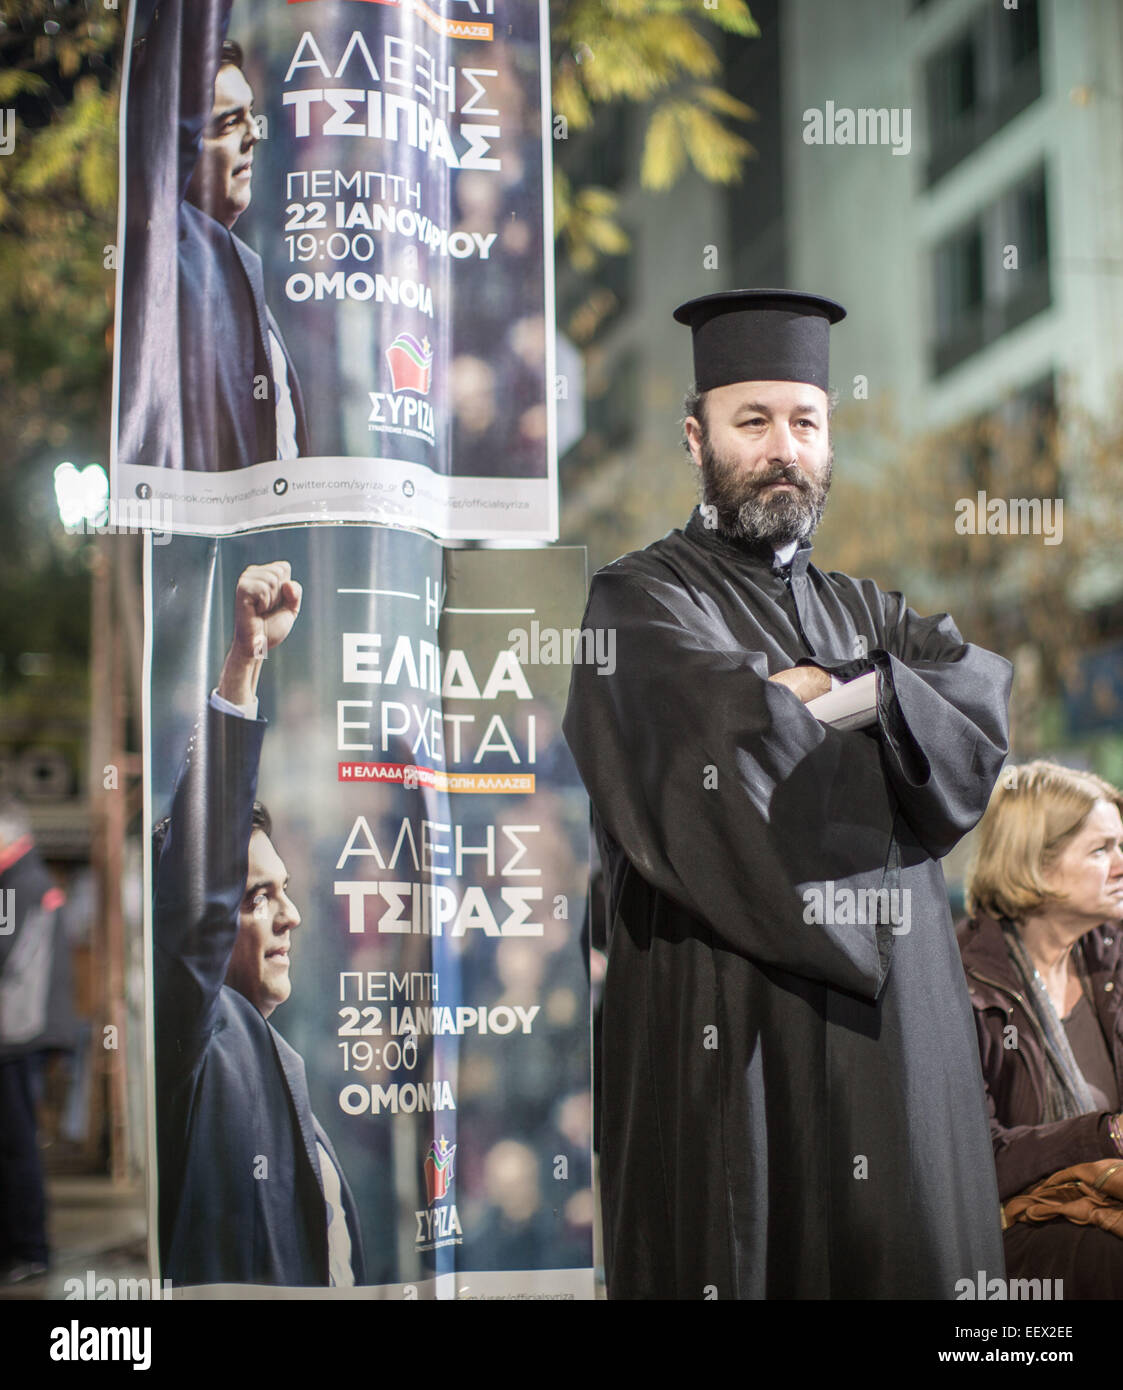 A priest is pictured next to poster of Alexis Tsipras, leader of the radical left main opposition party SYRIZA in Athens, 22 January prior to the last preelection rally. Greece's leftist, anti-austerity Syriza party has widened its lead at the top for the 25 January 2015 elections. Michael Kappeler/dpa (zu dpa "Vor griechischer Schicksalswahl Linkspartei deutlich vorn" am 22.01.2015) Stock Photo